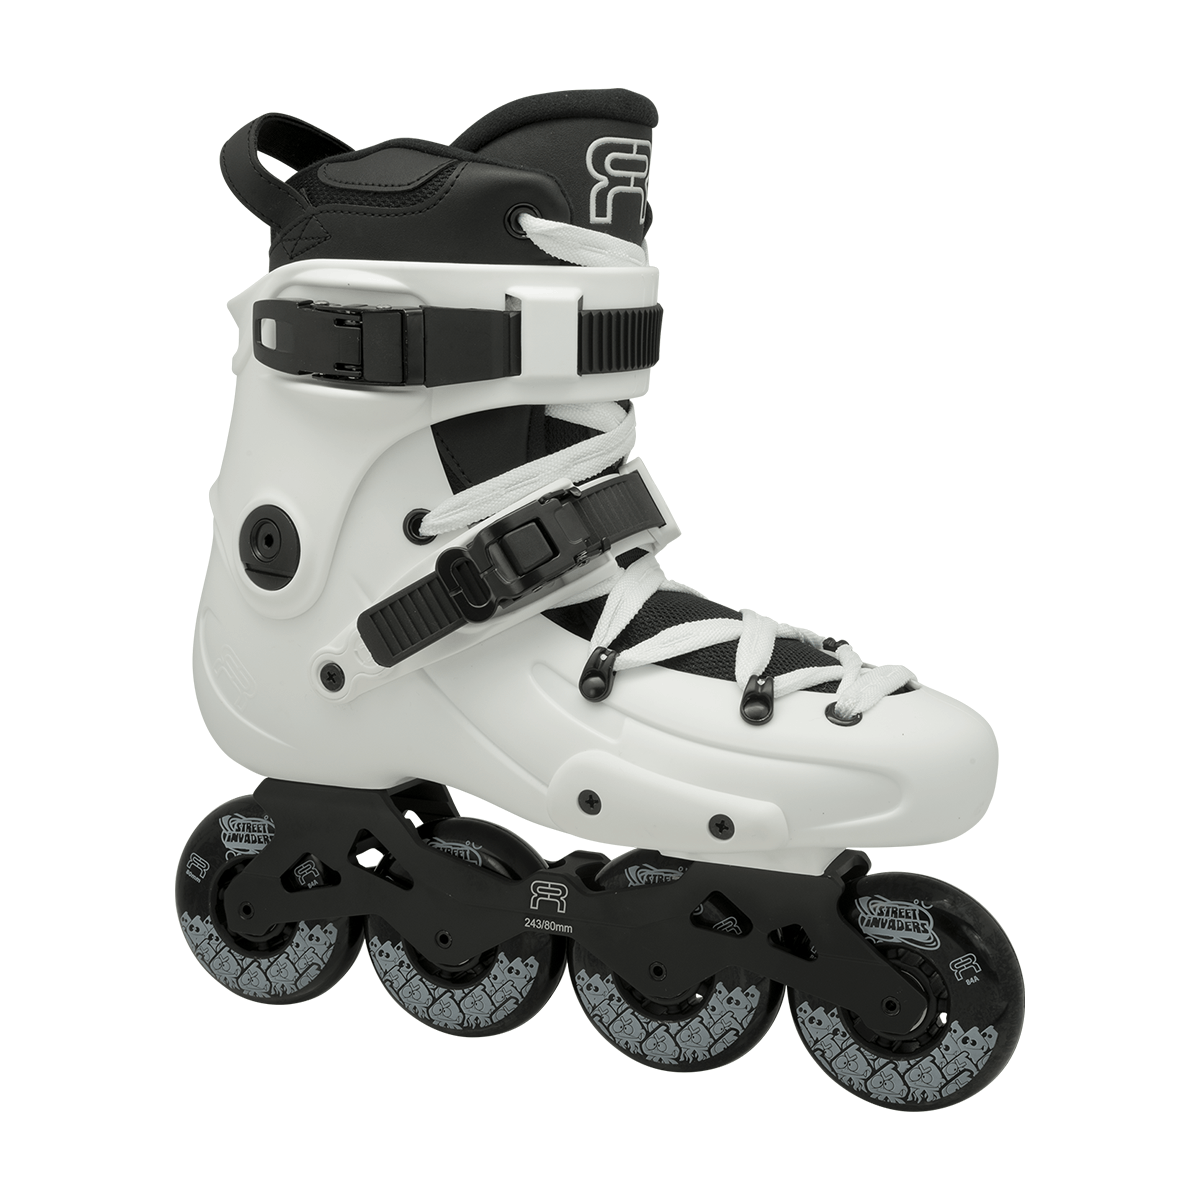 FR1 80 inline skate in white with 4 wheels of 80mm